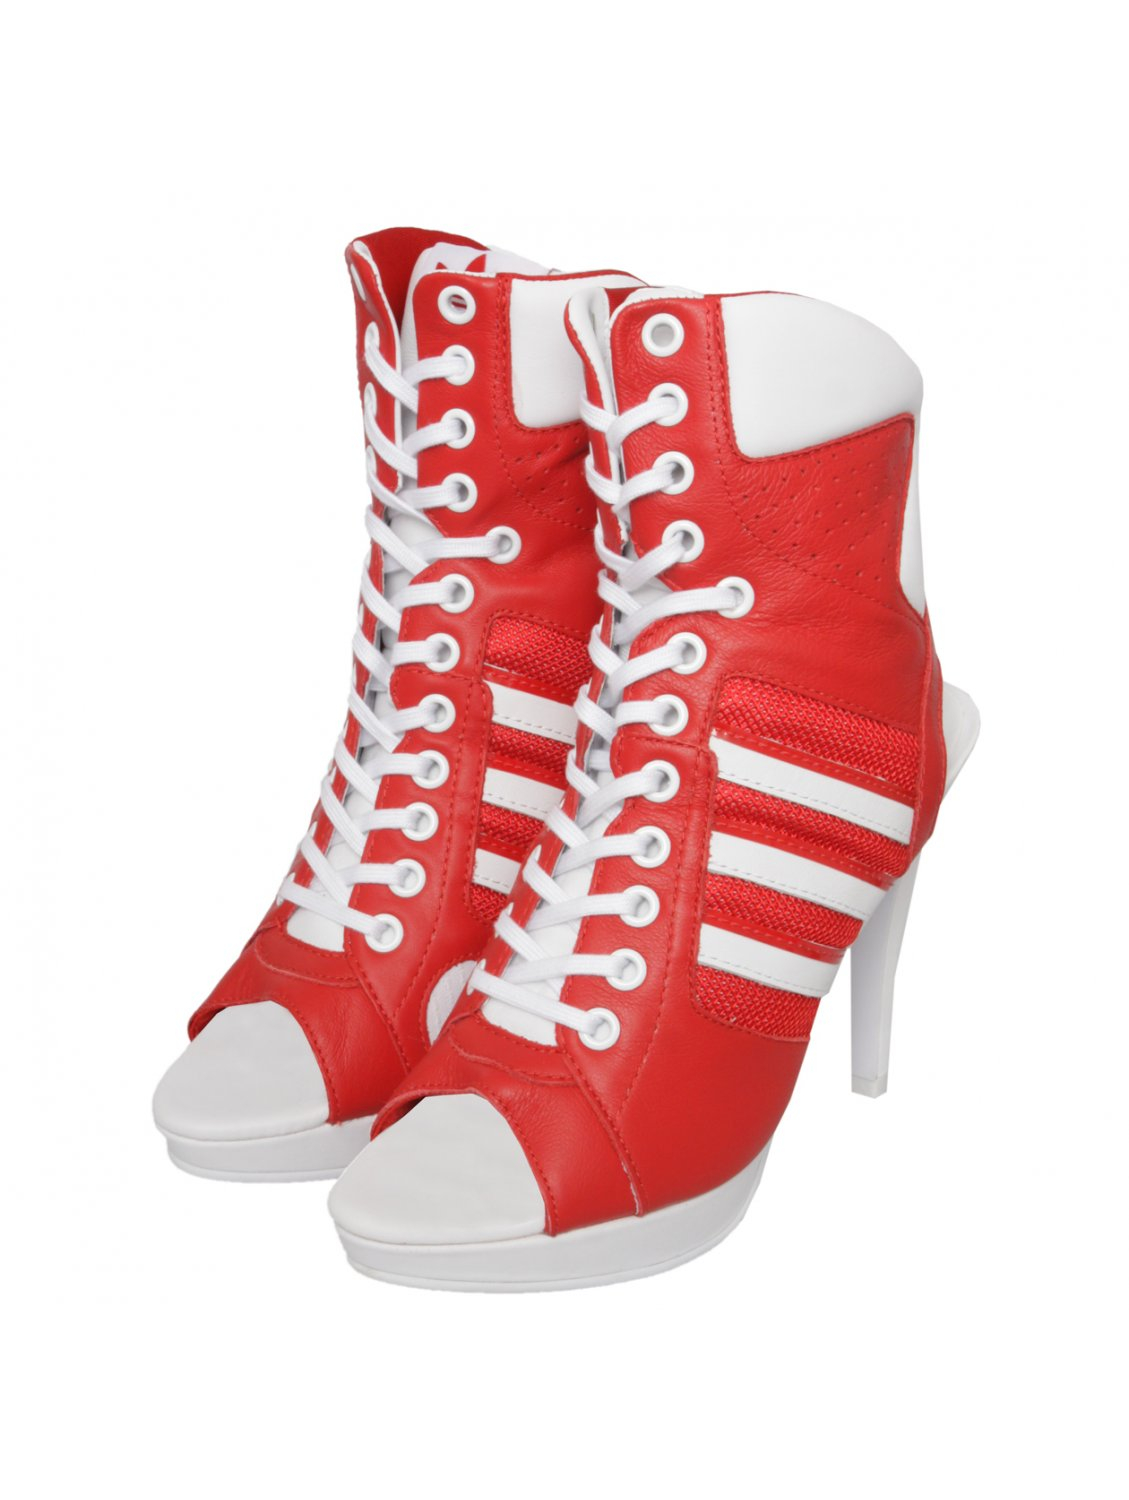 Buy > adidas by jeremy scott 130mm js high heel leather boots > in stock